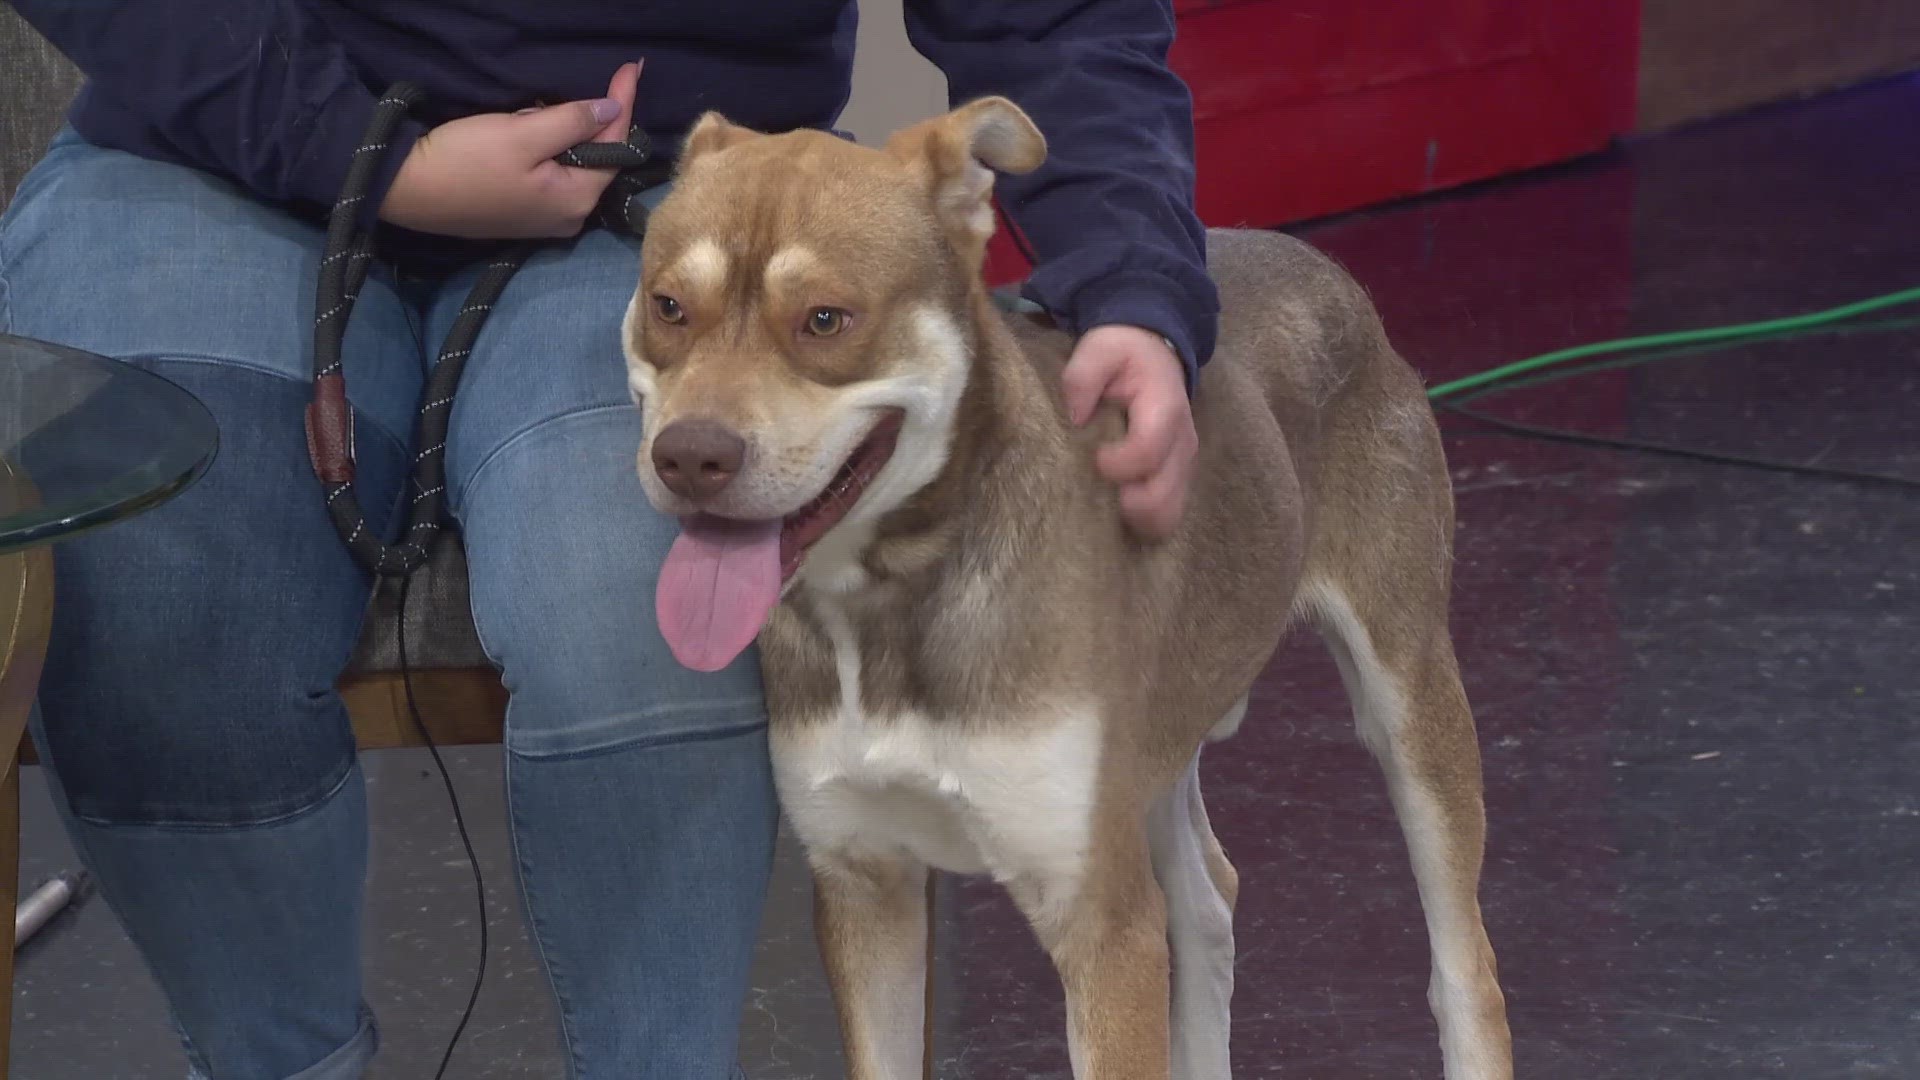 The Louisiana SPCA explains how animal control helps the community and how to handle dangerous situations with animals. Plus, Charles is looking for a loving home!